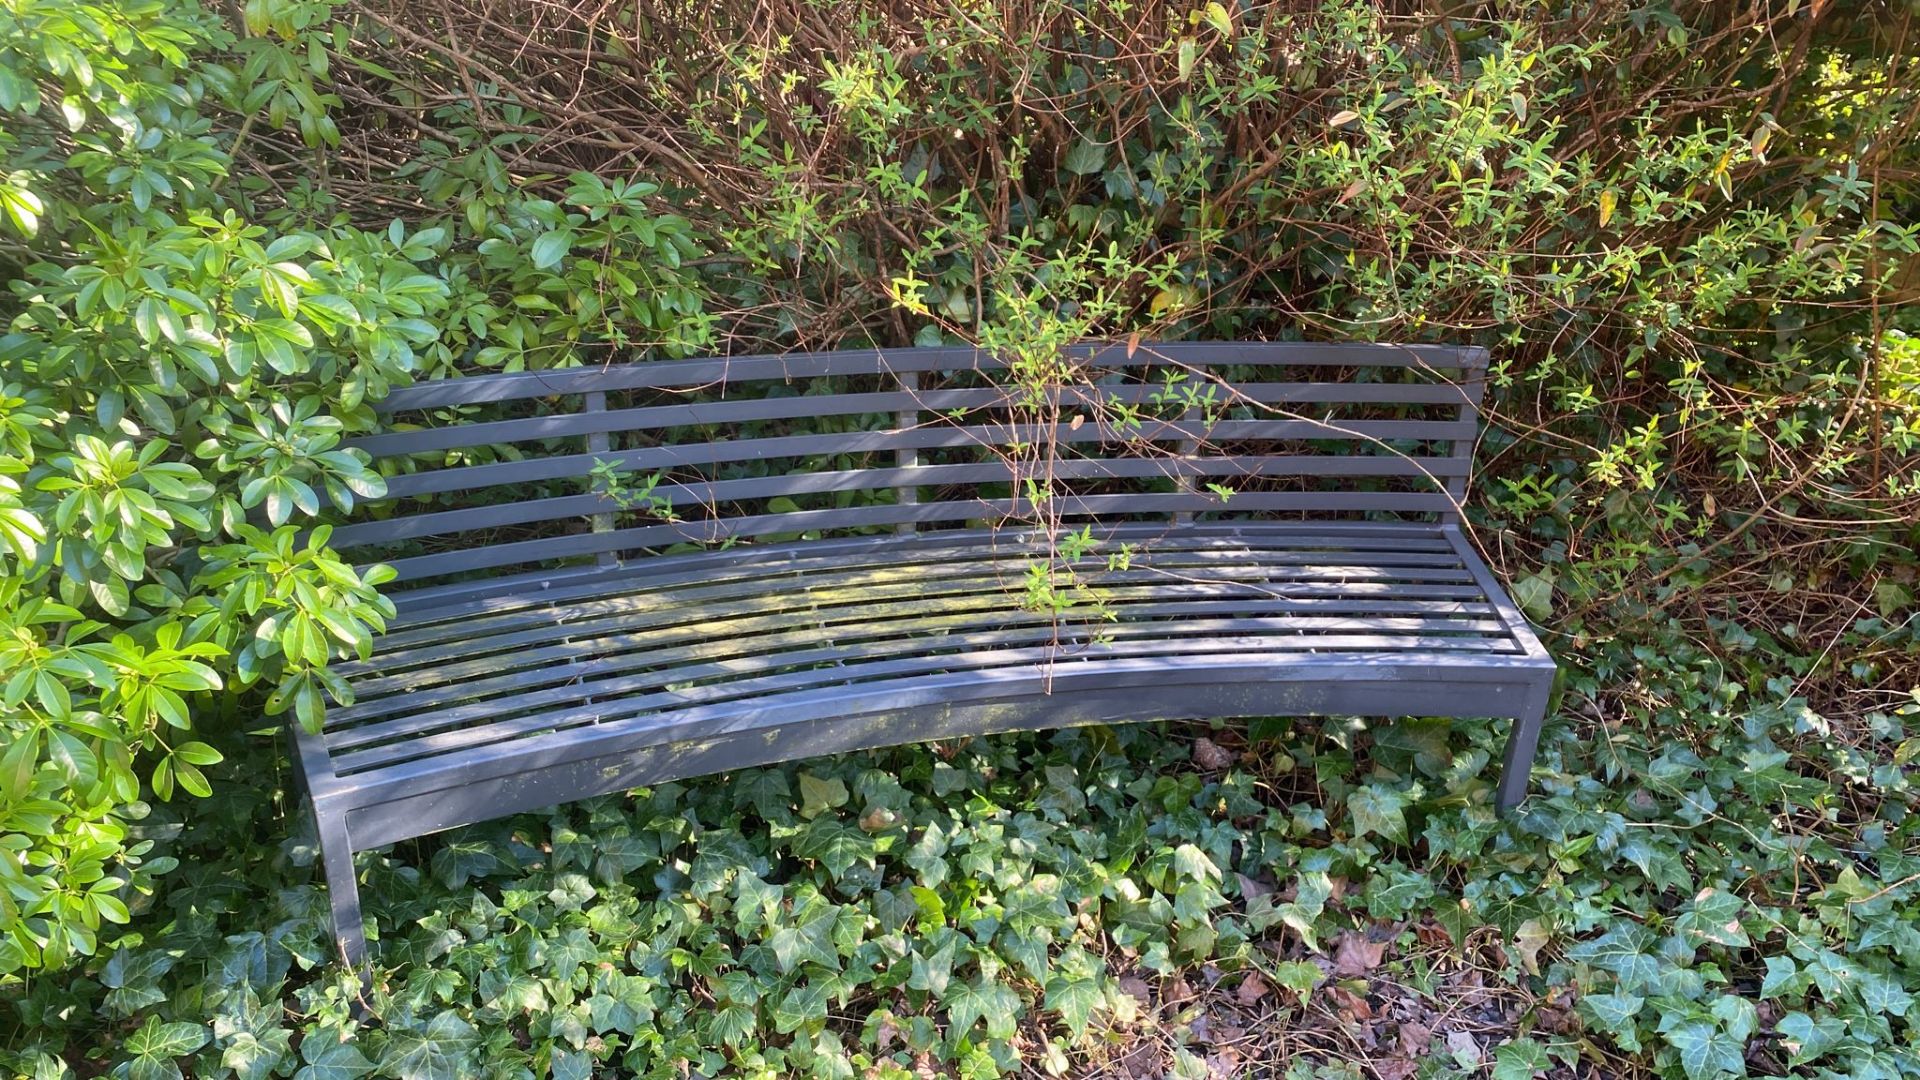 1 x Metal Seating Bench With a Curved Design and Slatted Seats / Backrests - Width: 180cms